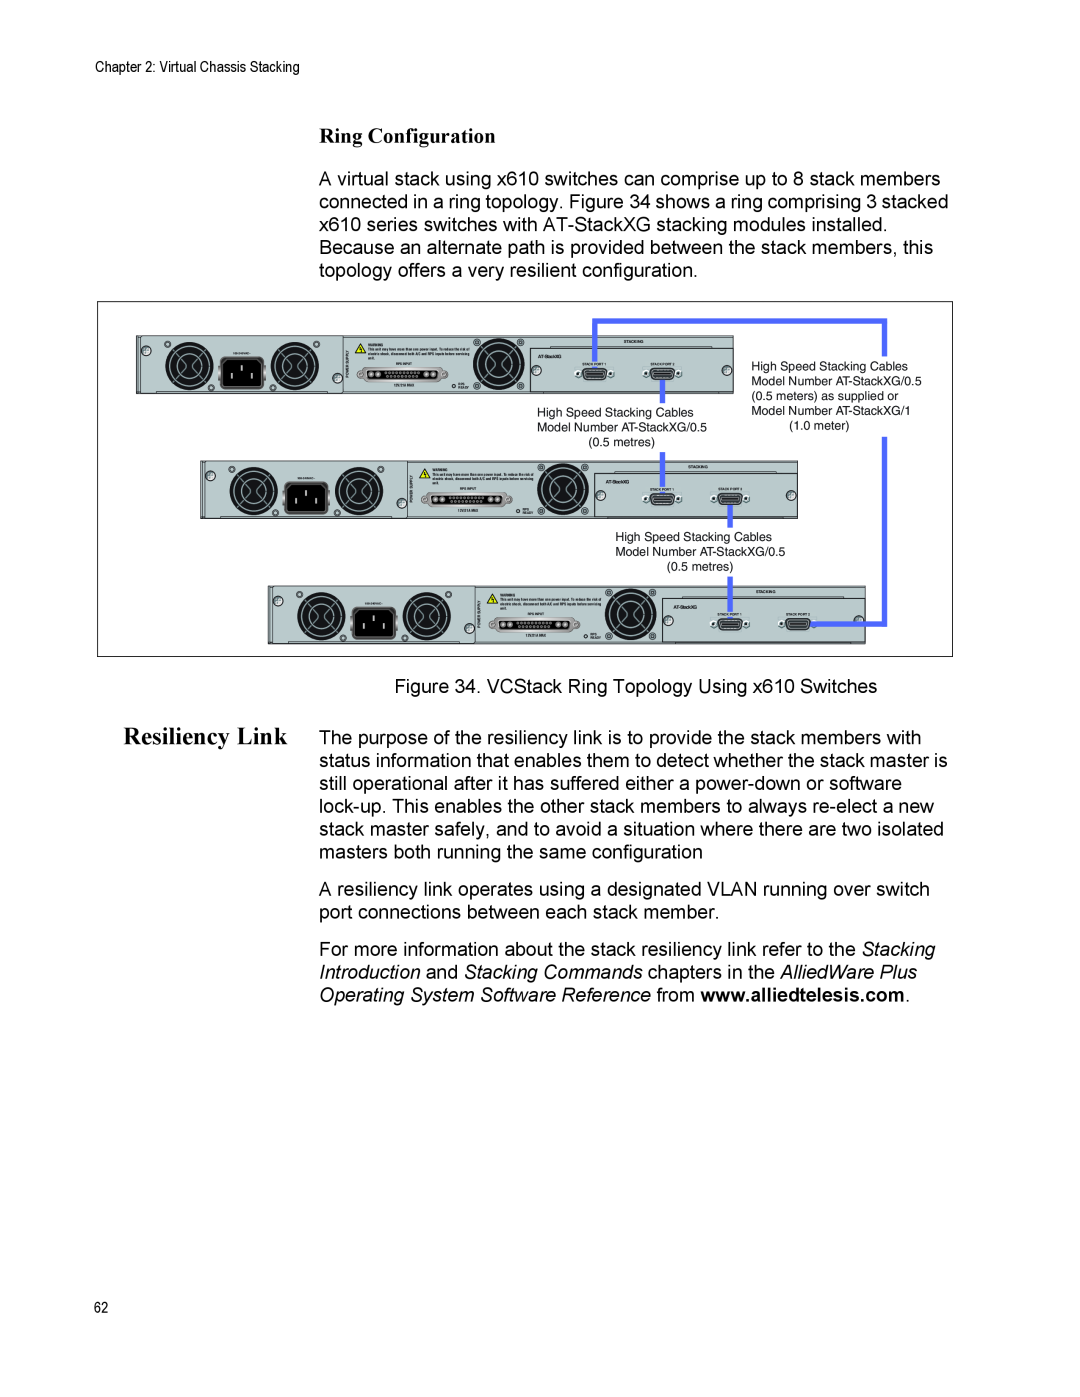 Allied Telesis X610-48TS/X-POE+ Ring Configuration, Introduction and Stacking Commands chapters in the AlliedWare Plus 